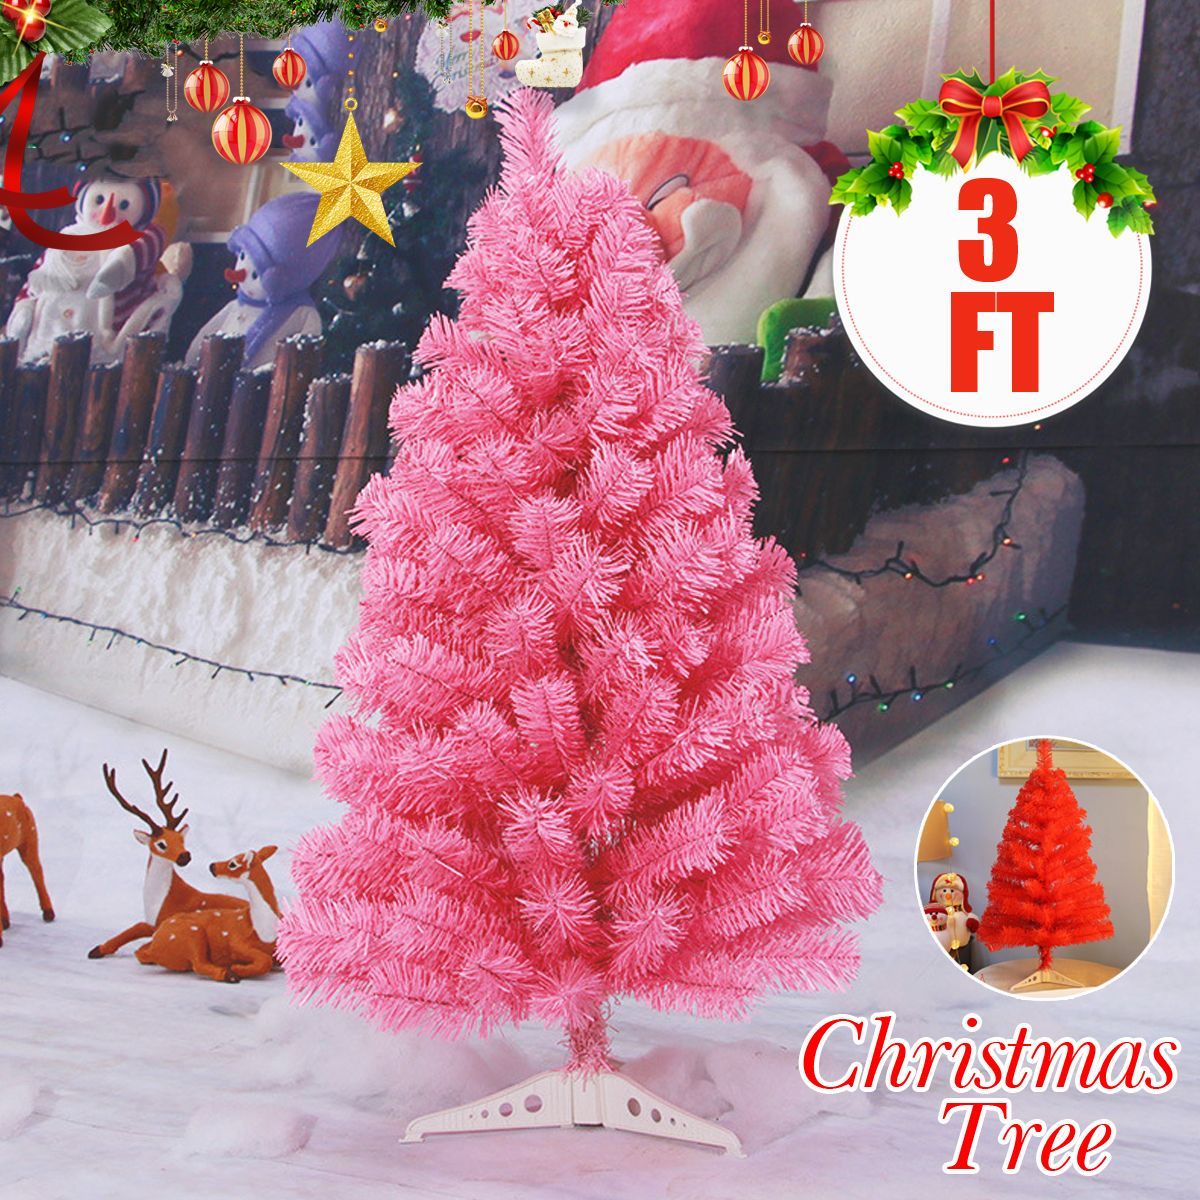 Christmas-Tree-3FT-Xmas-Decor-For-Childrens--Toddler-Play-Decorations-Home-1605826